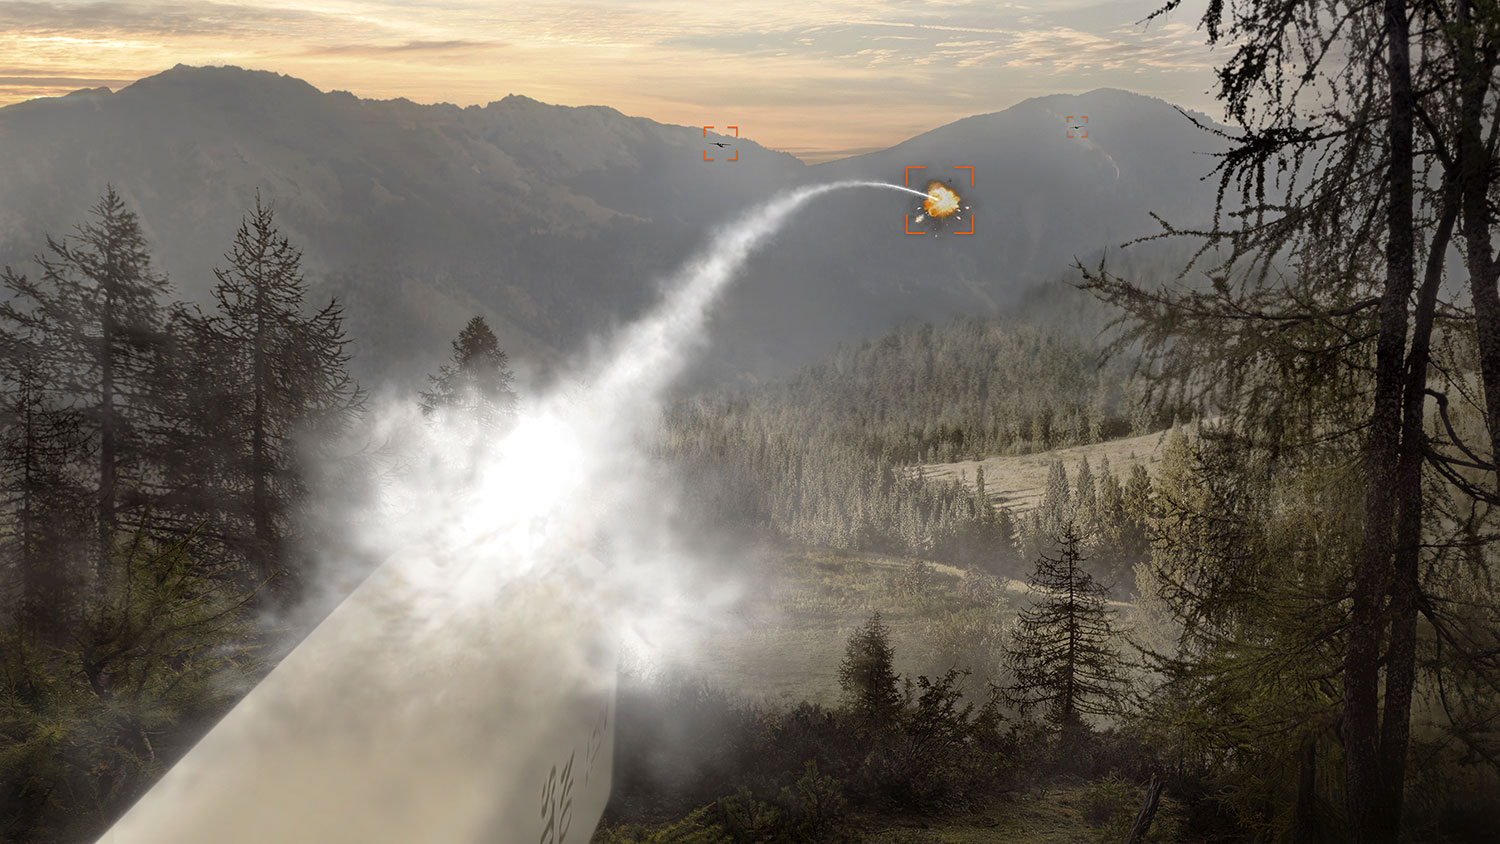 BAE Systems tests APKWS laser-guided rockets to destroy airborne drones.